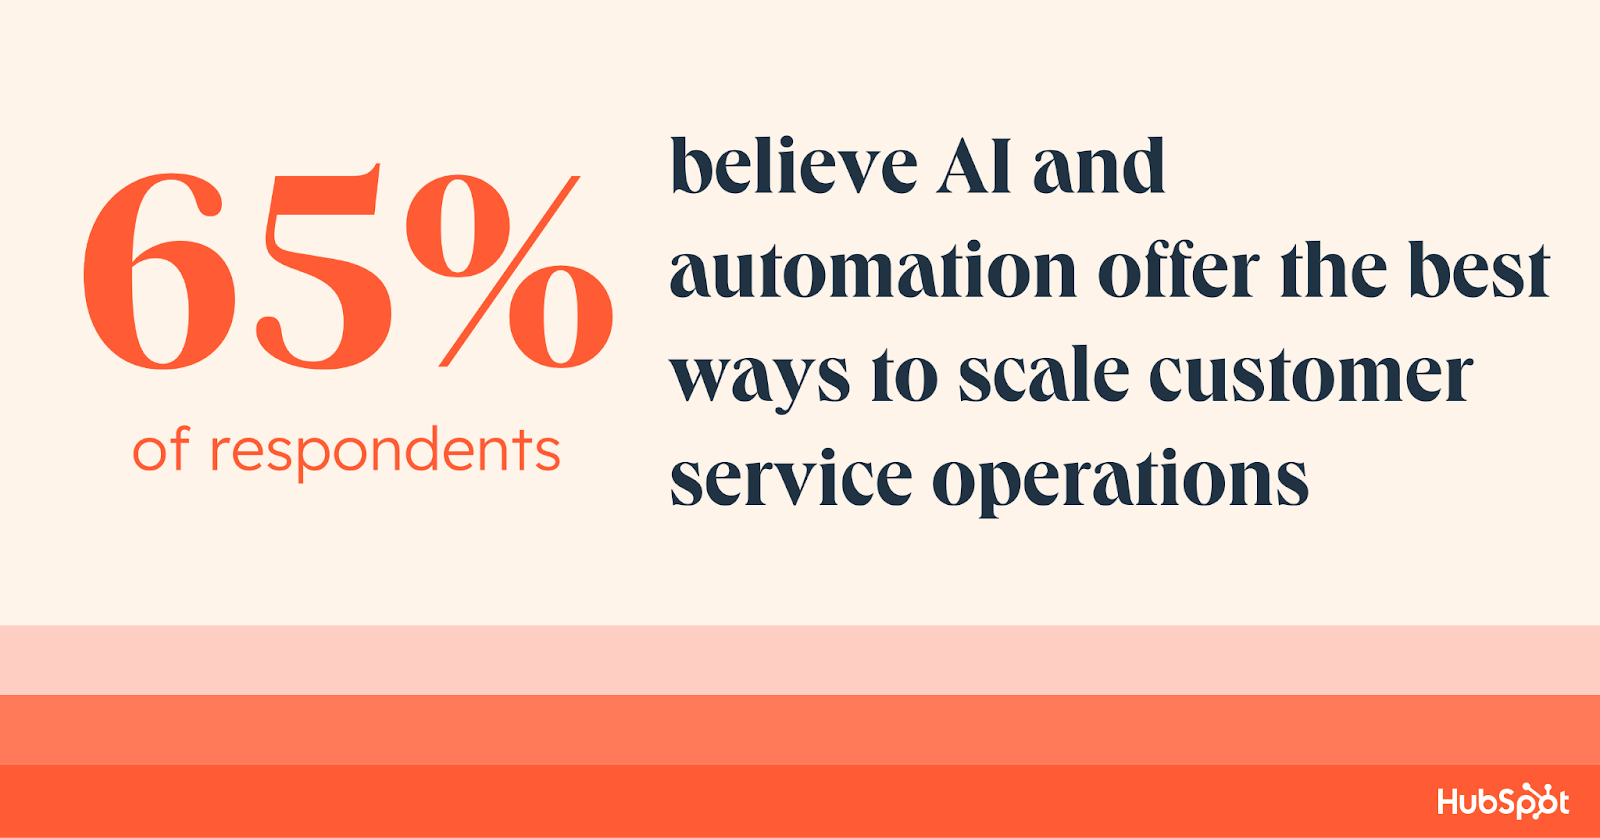 graphic showing statistic around AI to scale customer service